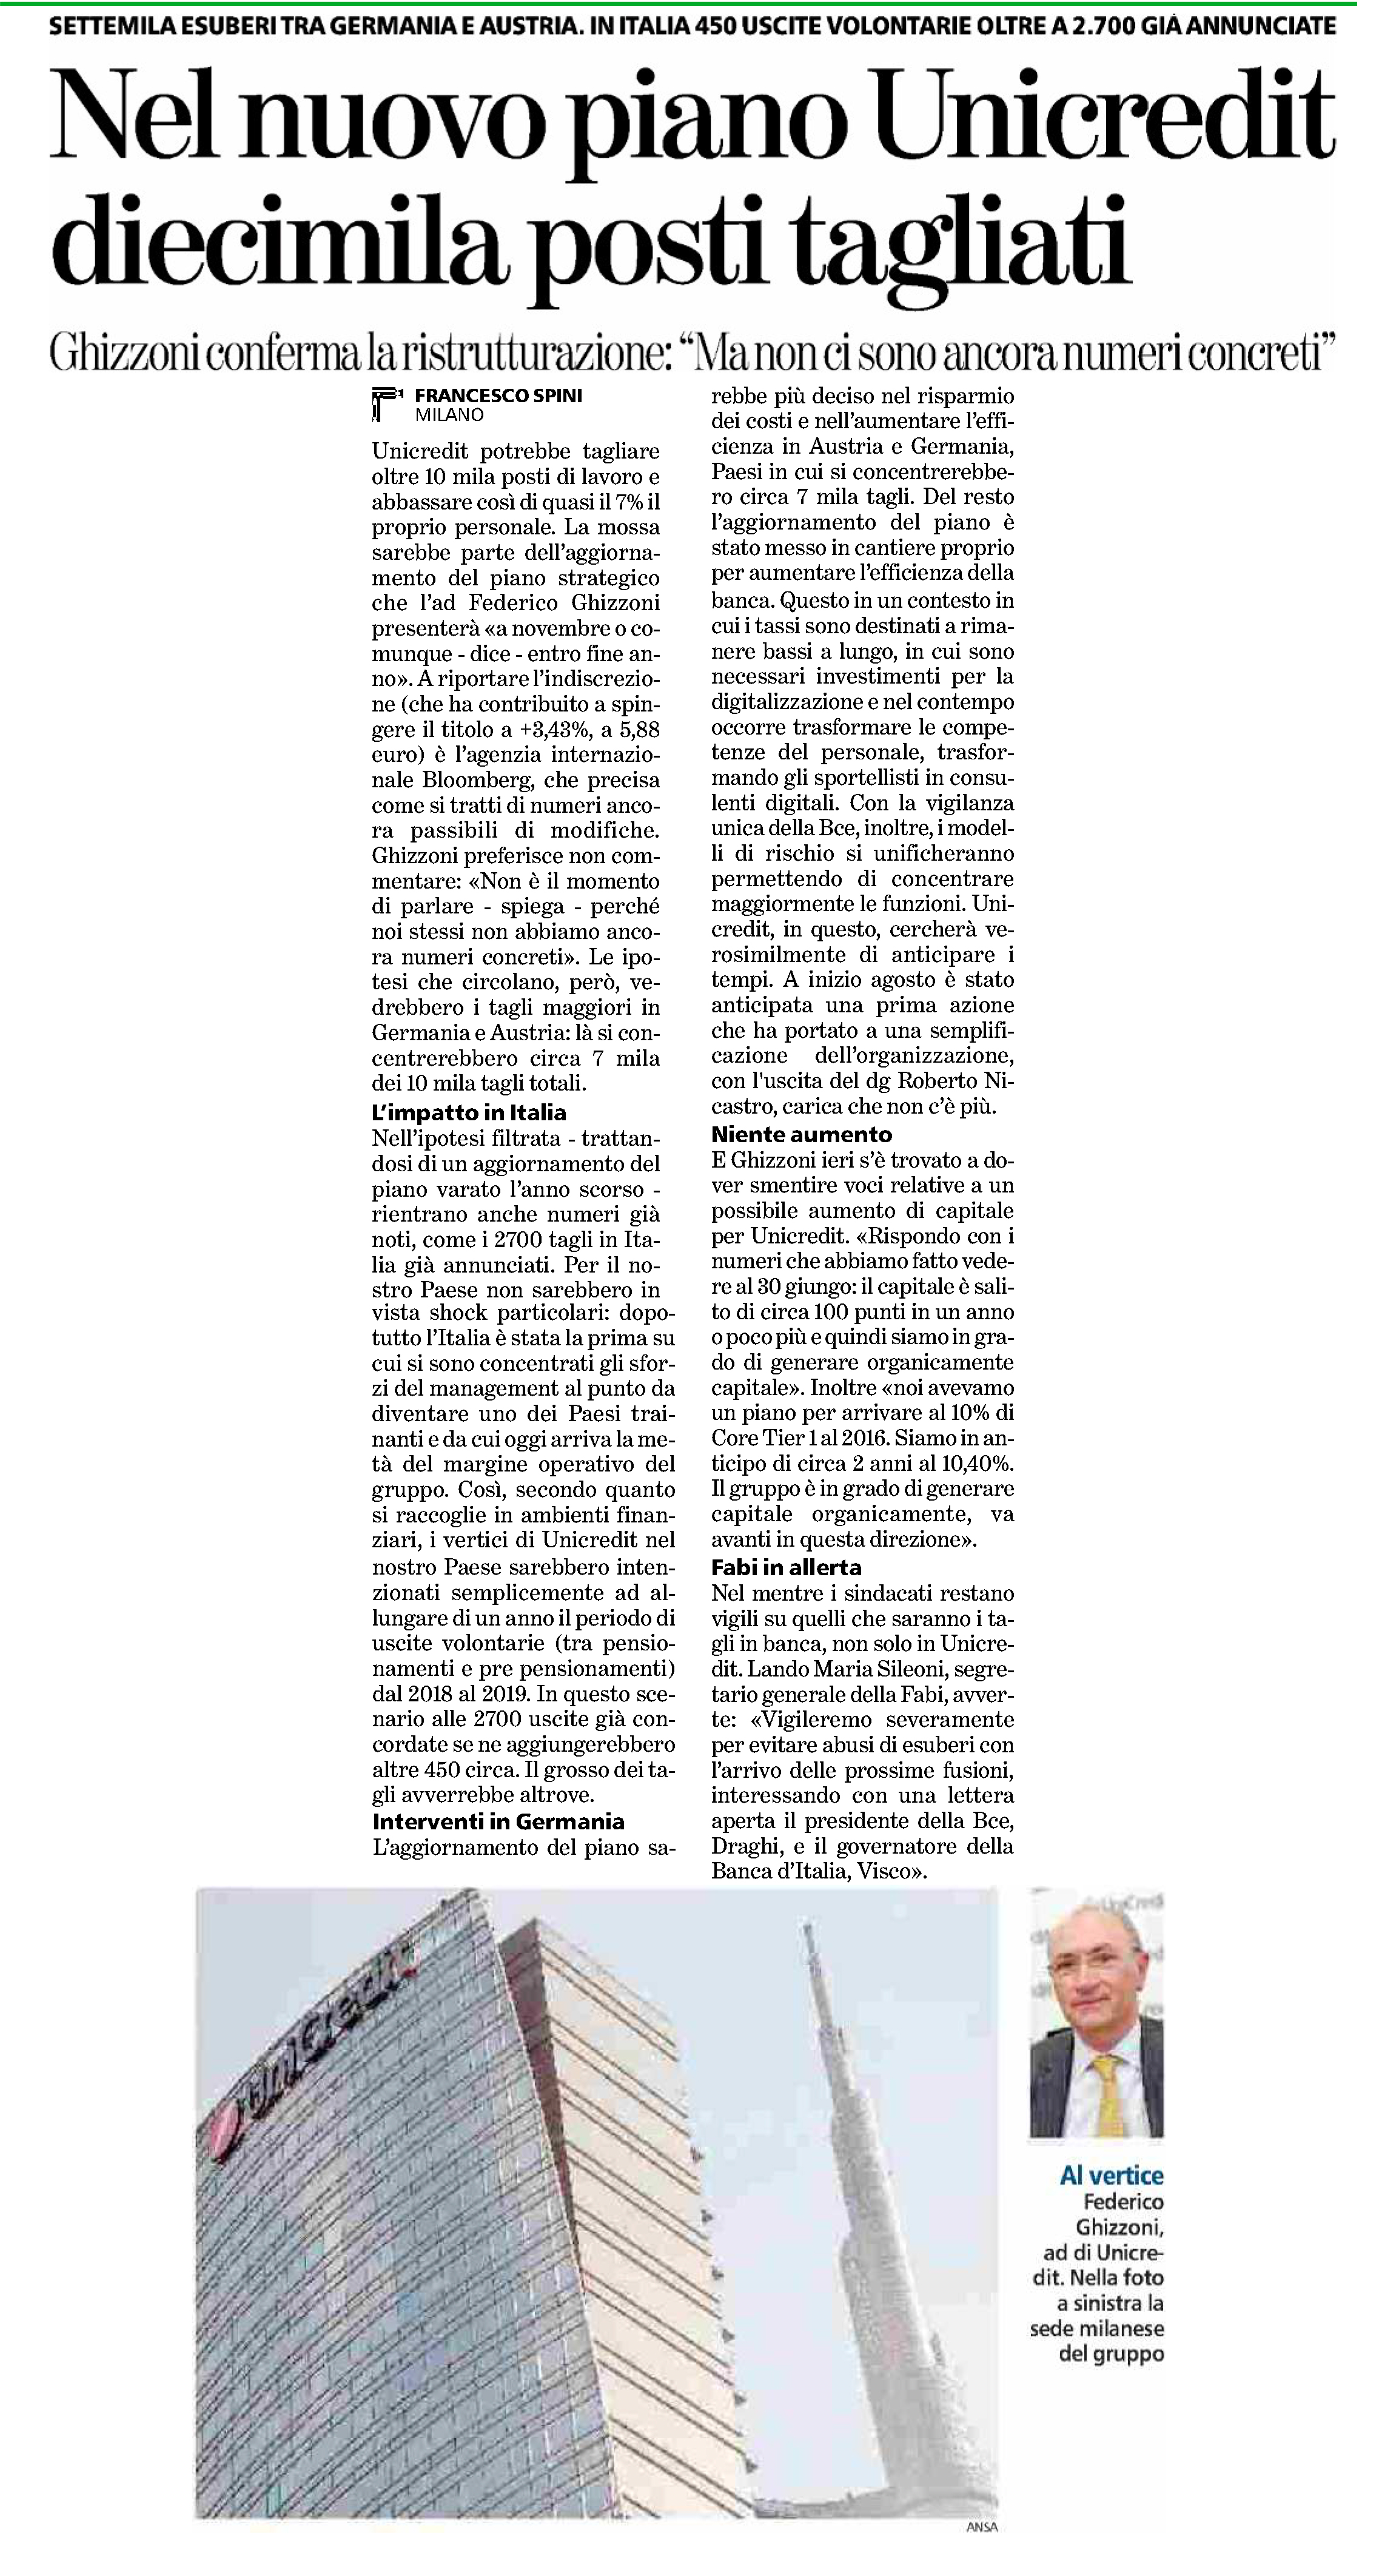 giornale 1